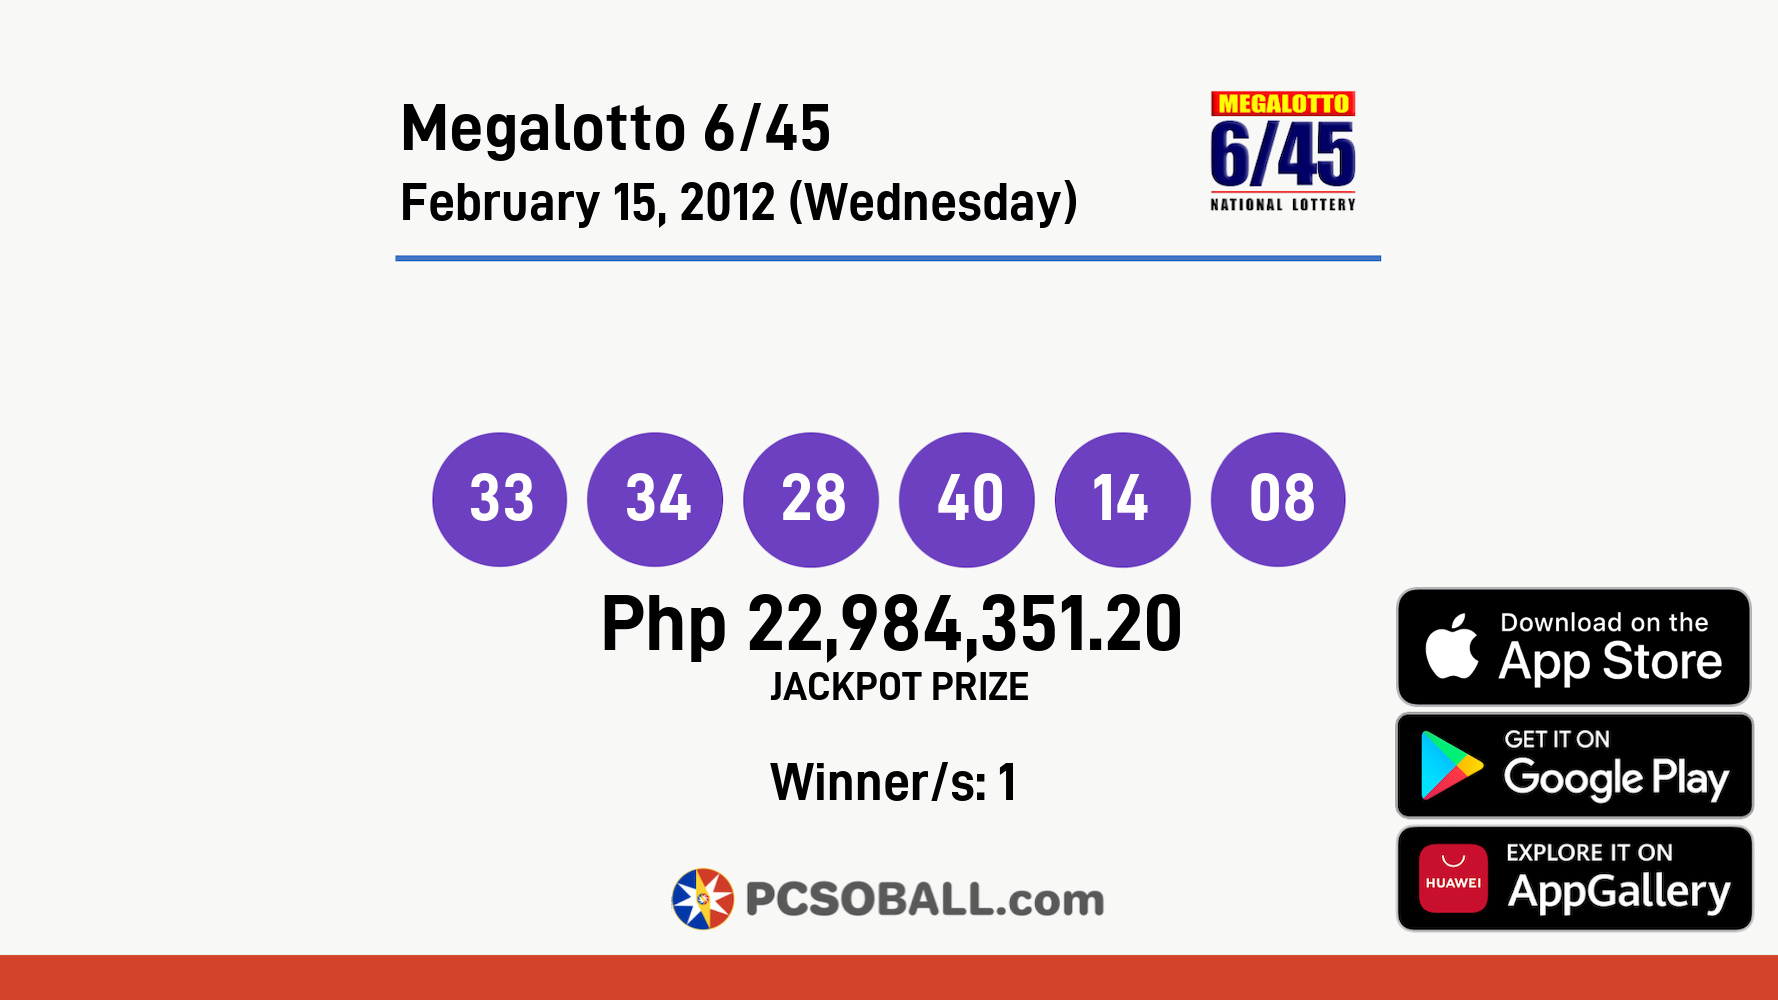 Megalotto 6/45 February 15, 2012 (Wednesday) Result